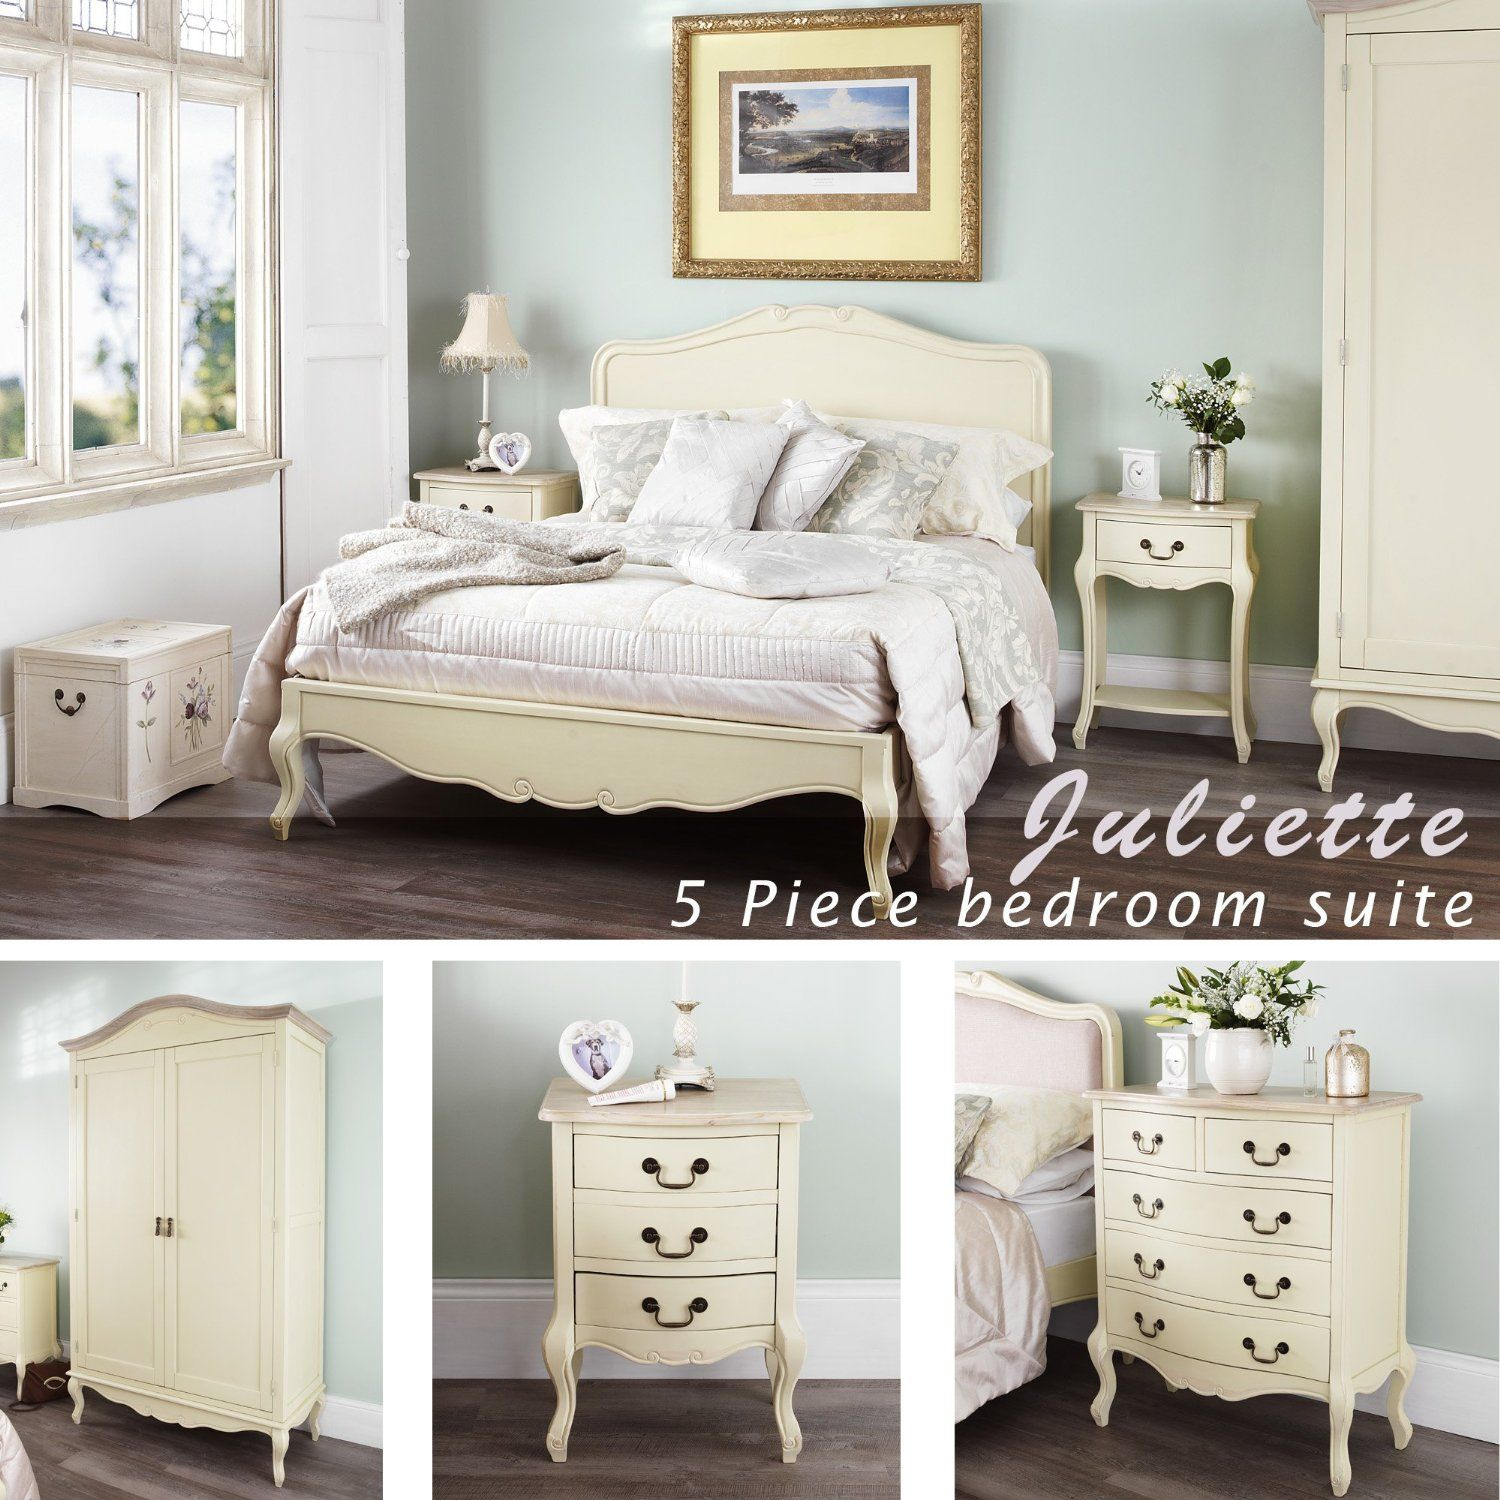 Gorgeous Juliette Shab Chic Champagne 5pc Bedroom Furniture Set intended for sizing 1500 X 1500